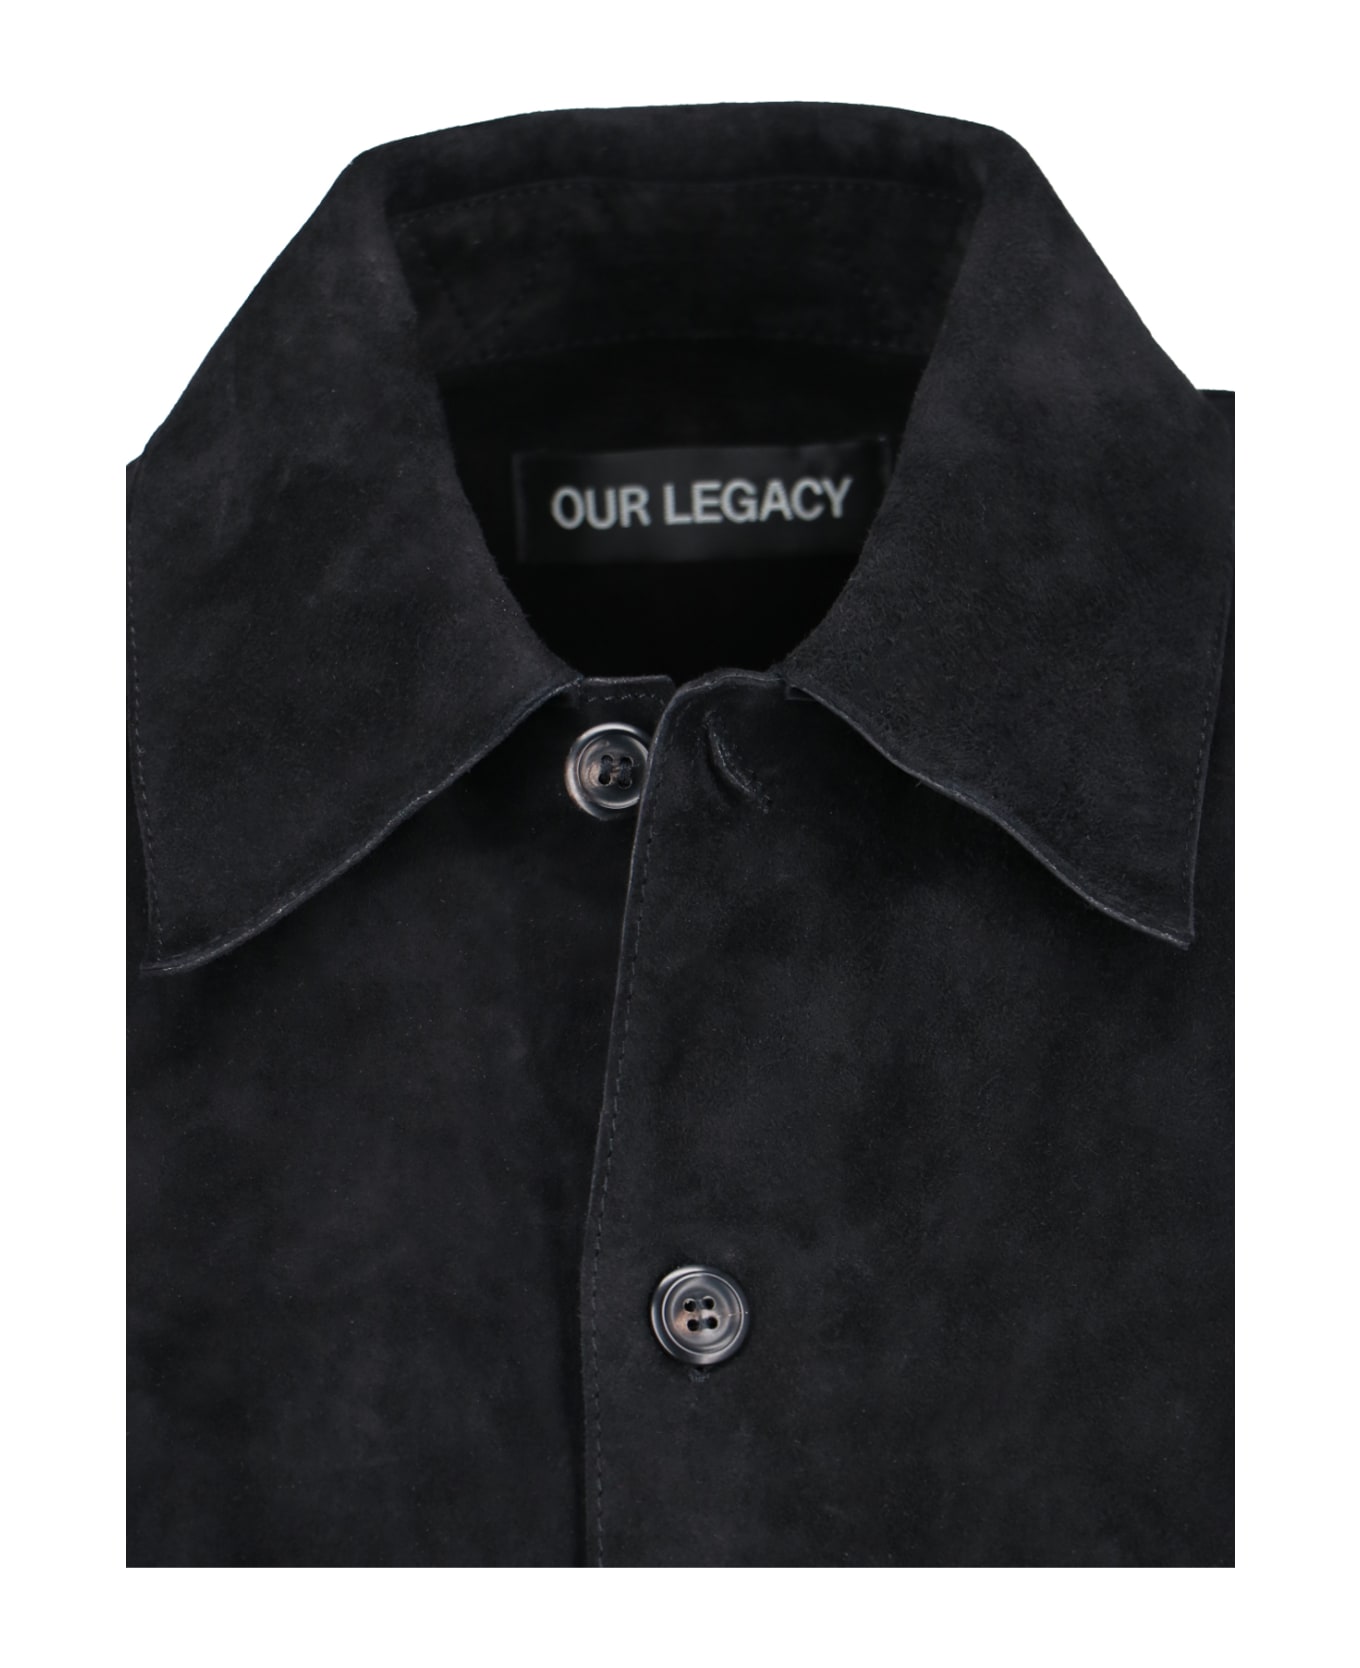 Our Legacy Suede Shirt - Black  